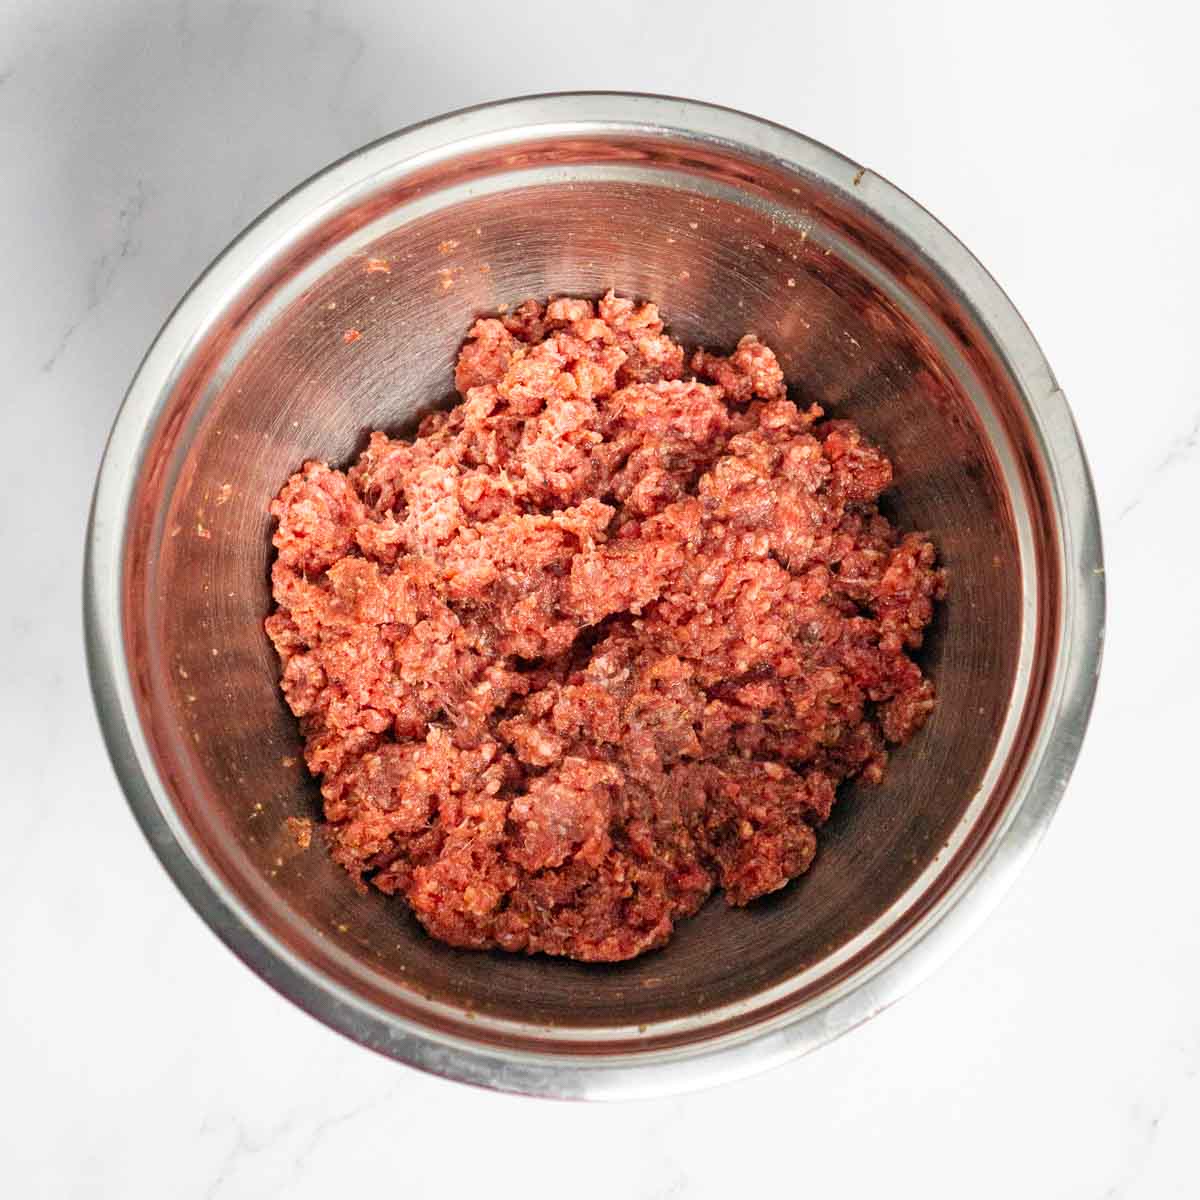 Ground beef mixed with seasonings in a bowl